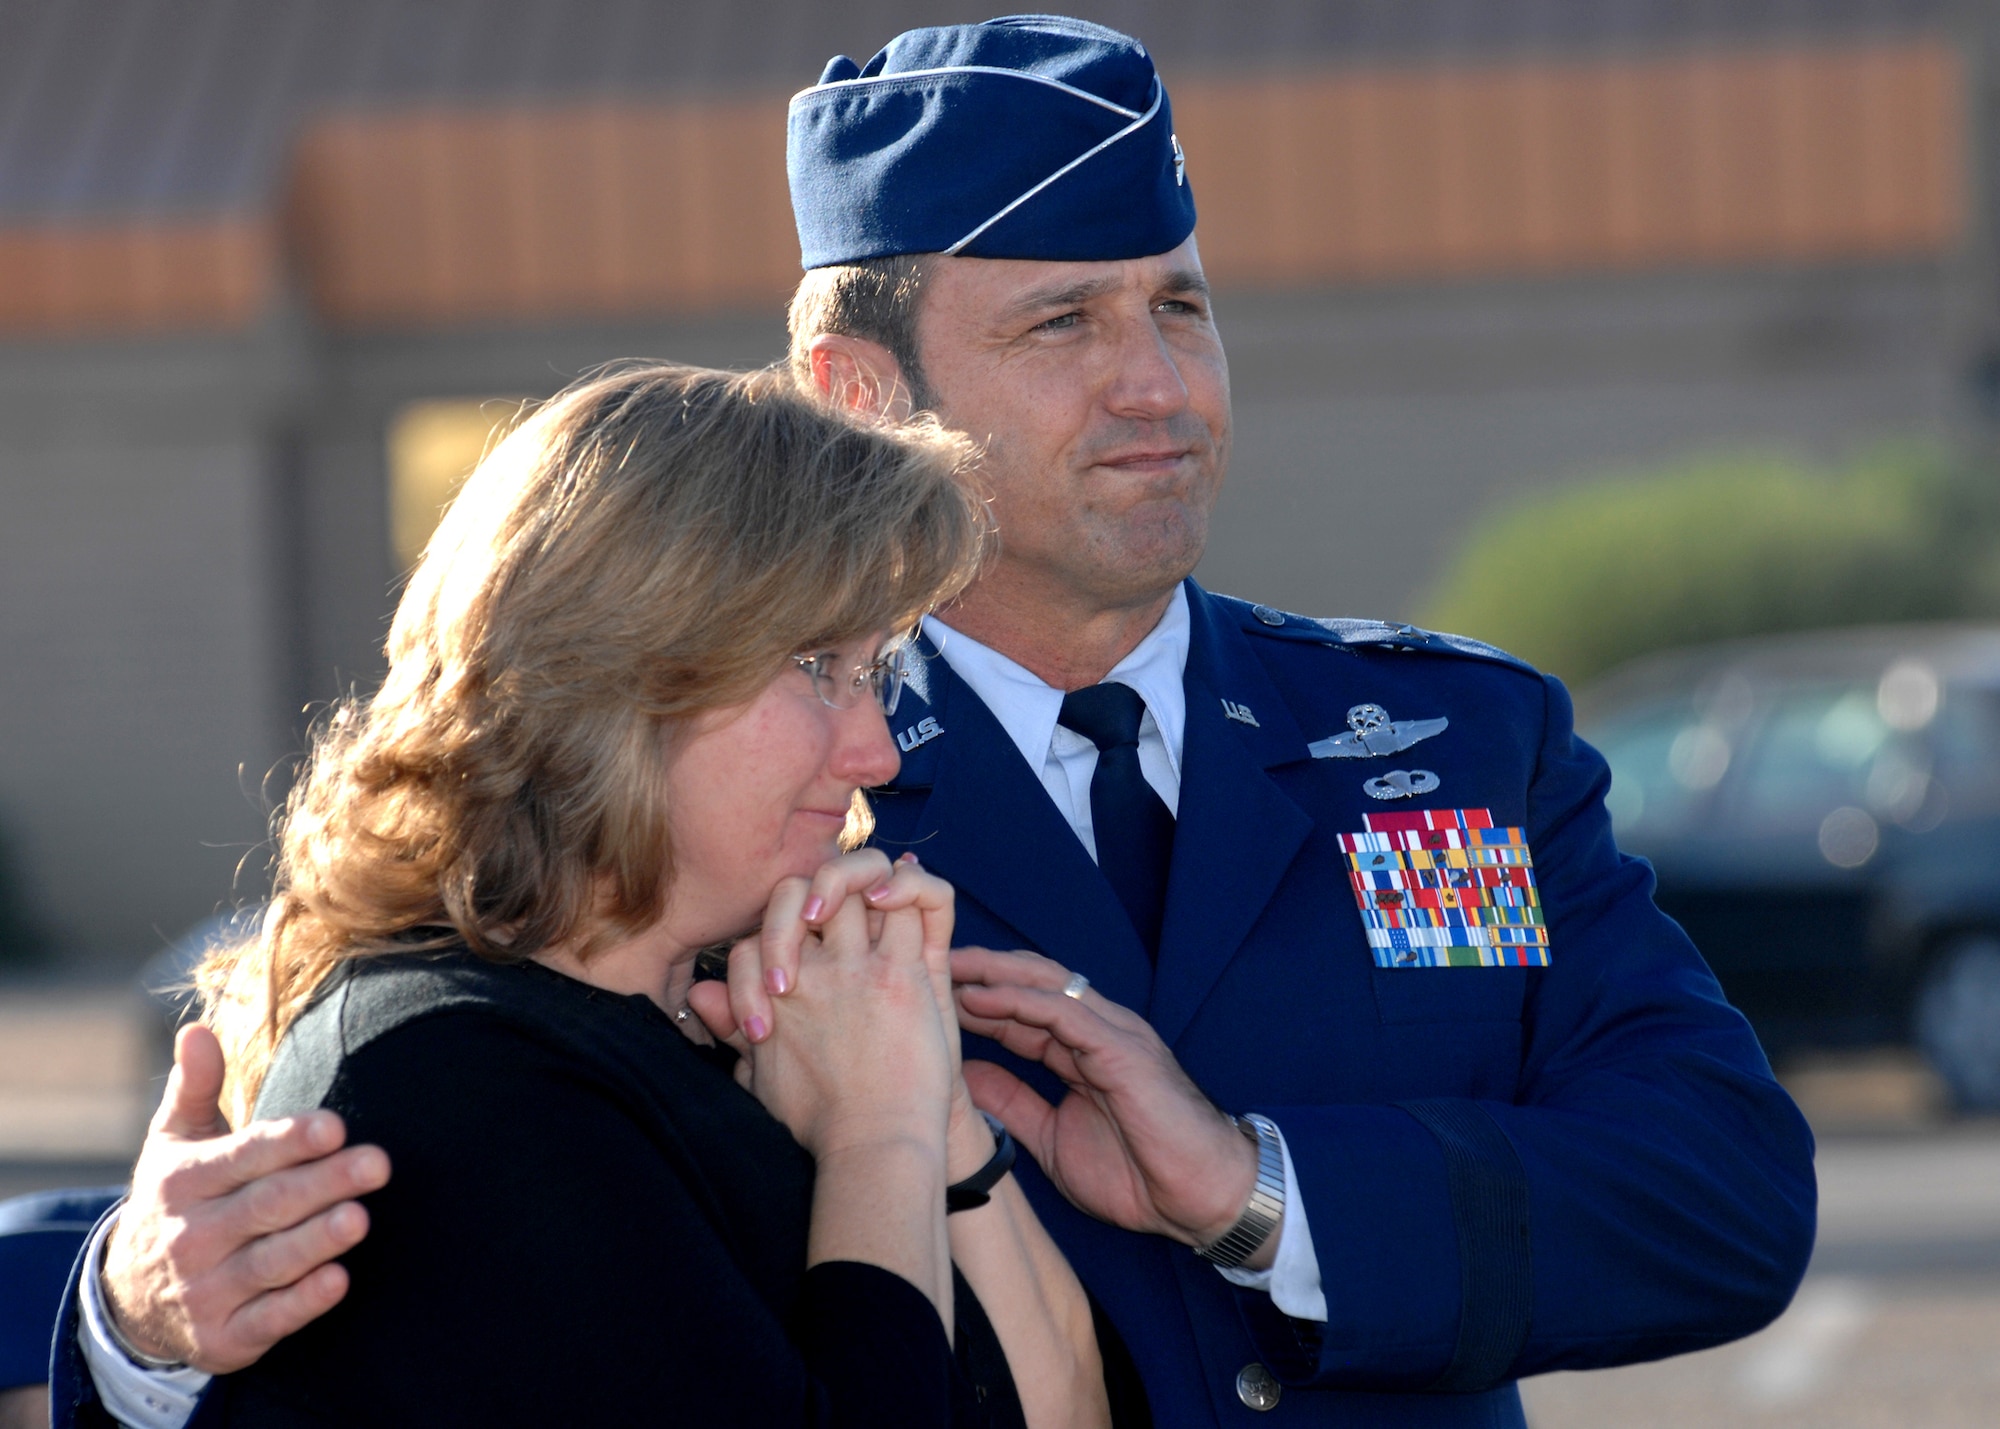 Brig. Gen. Tom Jones, 56th Fighter Wing commander, comforts Lisa Gillespie, wife of Master Sgt. Randy Gillespie, after the street sign revealing the newly-named Gillespie Drive was unveiled Dec. 18. Sergeant Gillespie was killed in action July 9, 2007. (photo by Tech. Sgt. Raheem Moore)